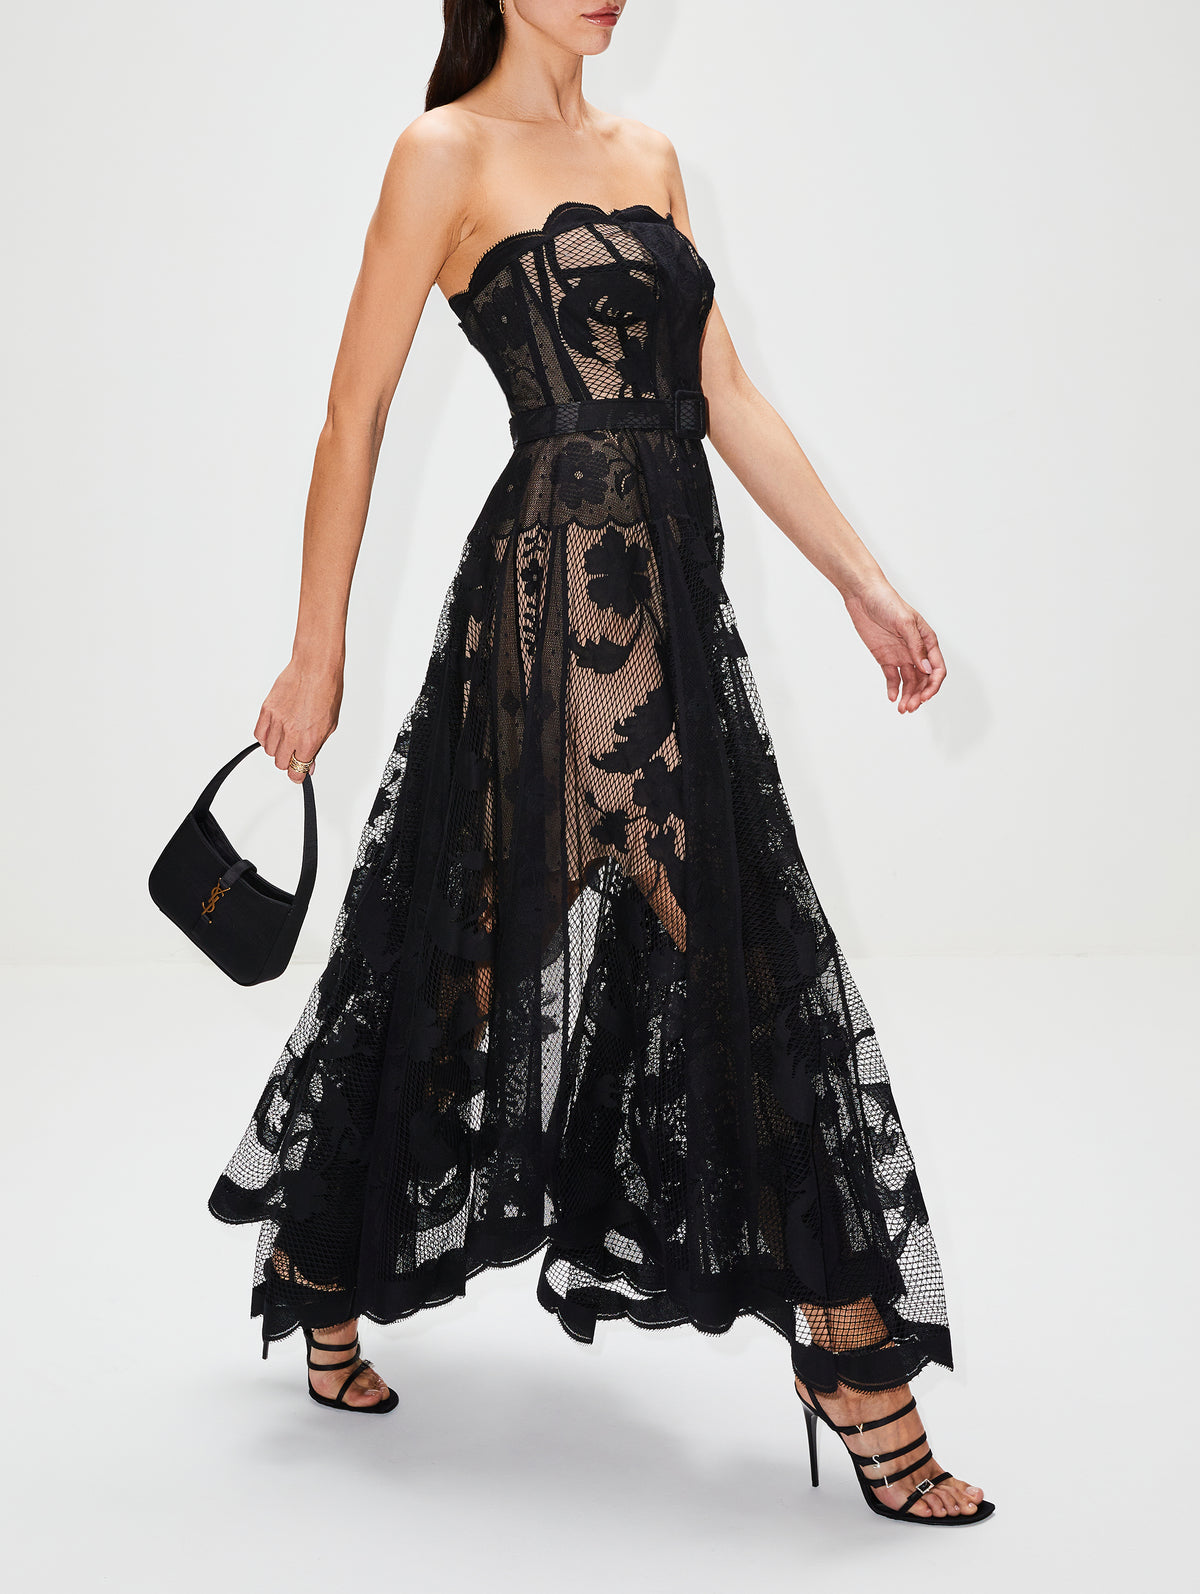 Strapless Floral Lace Dress